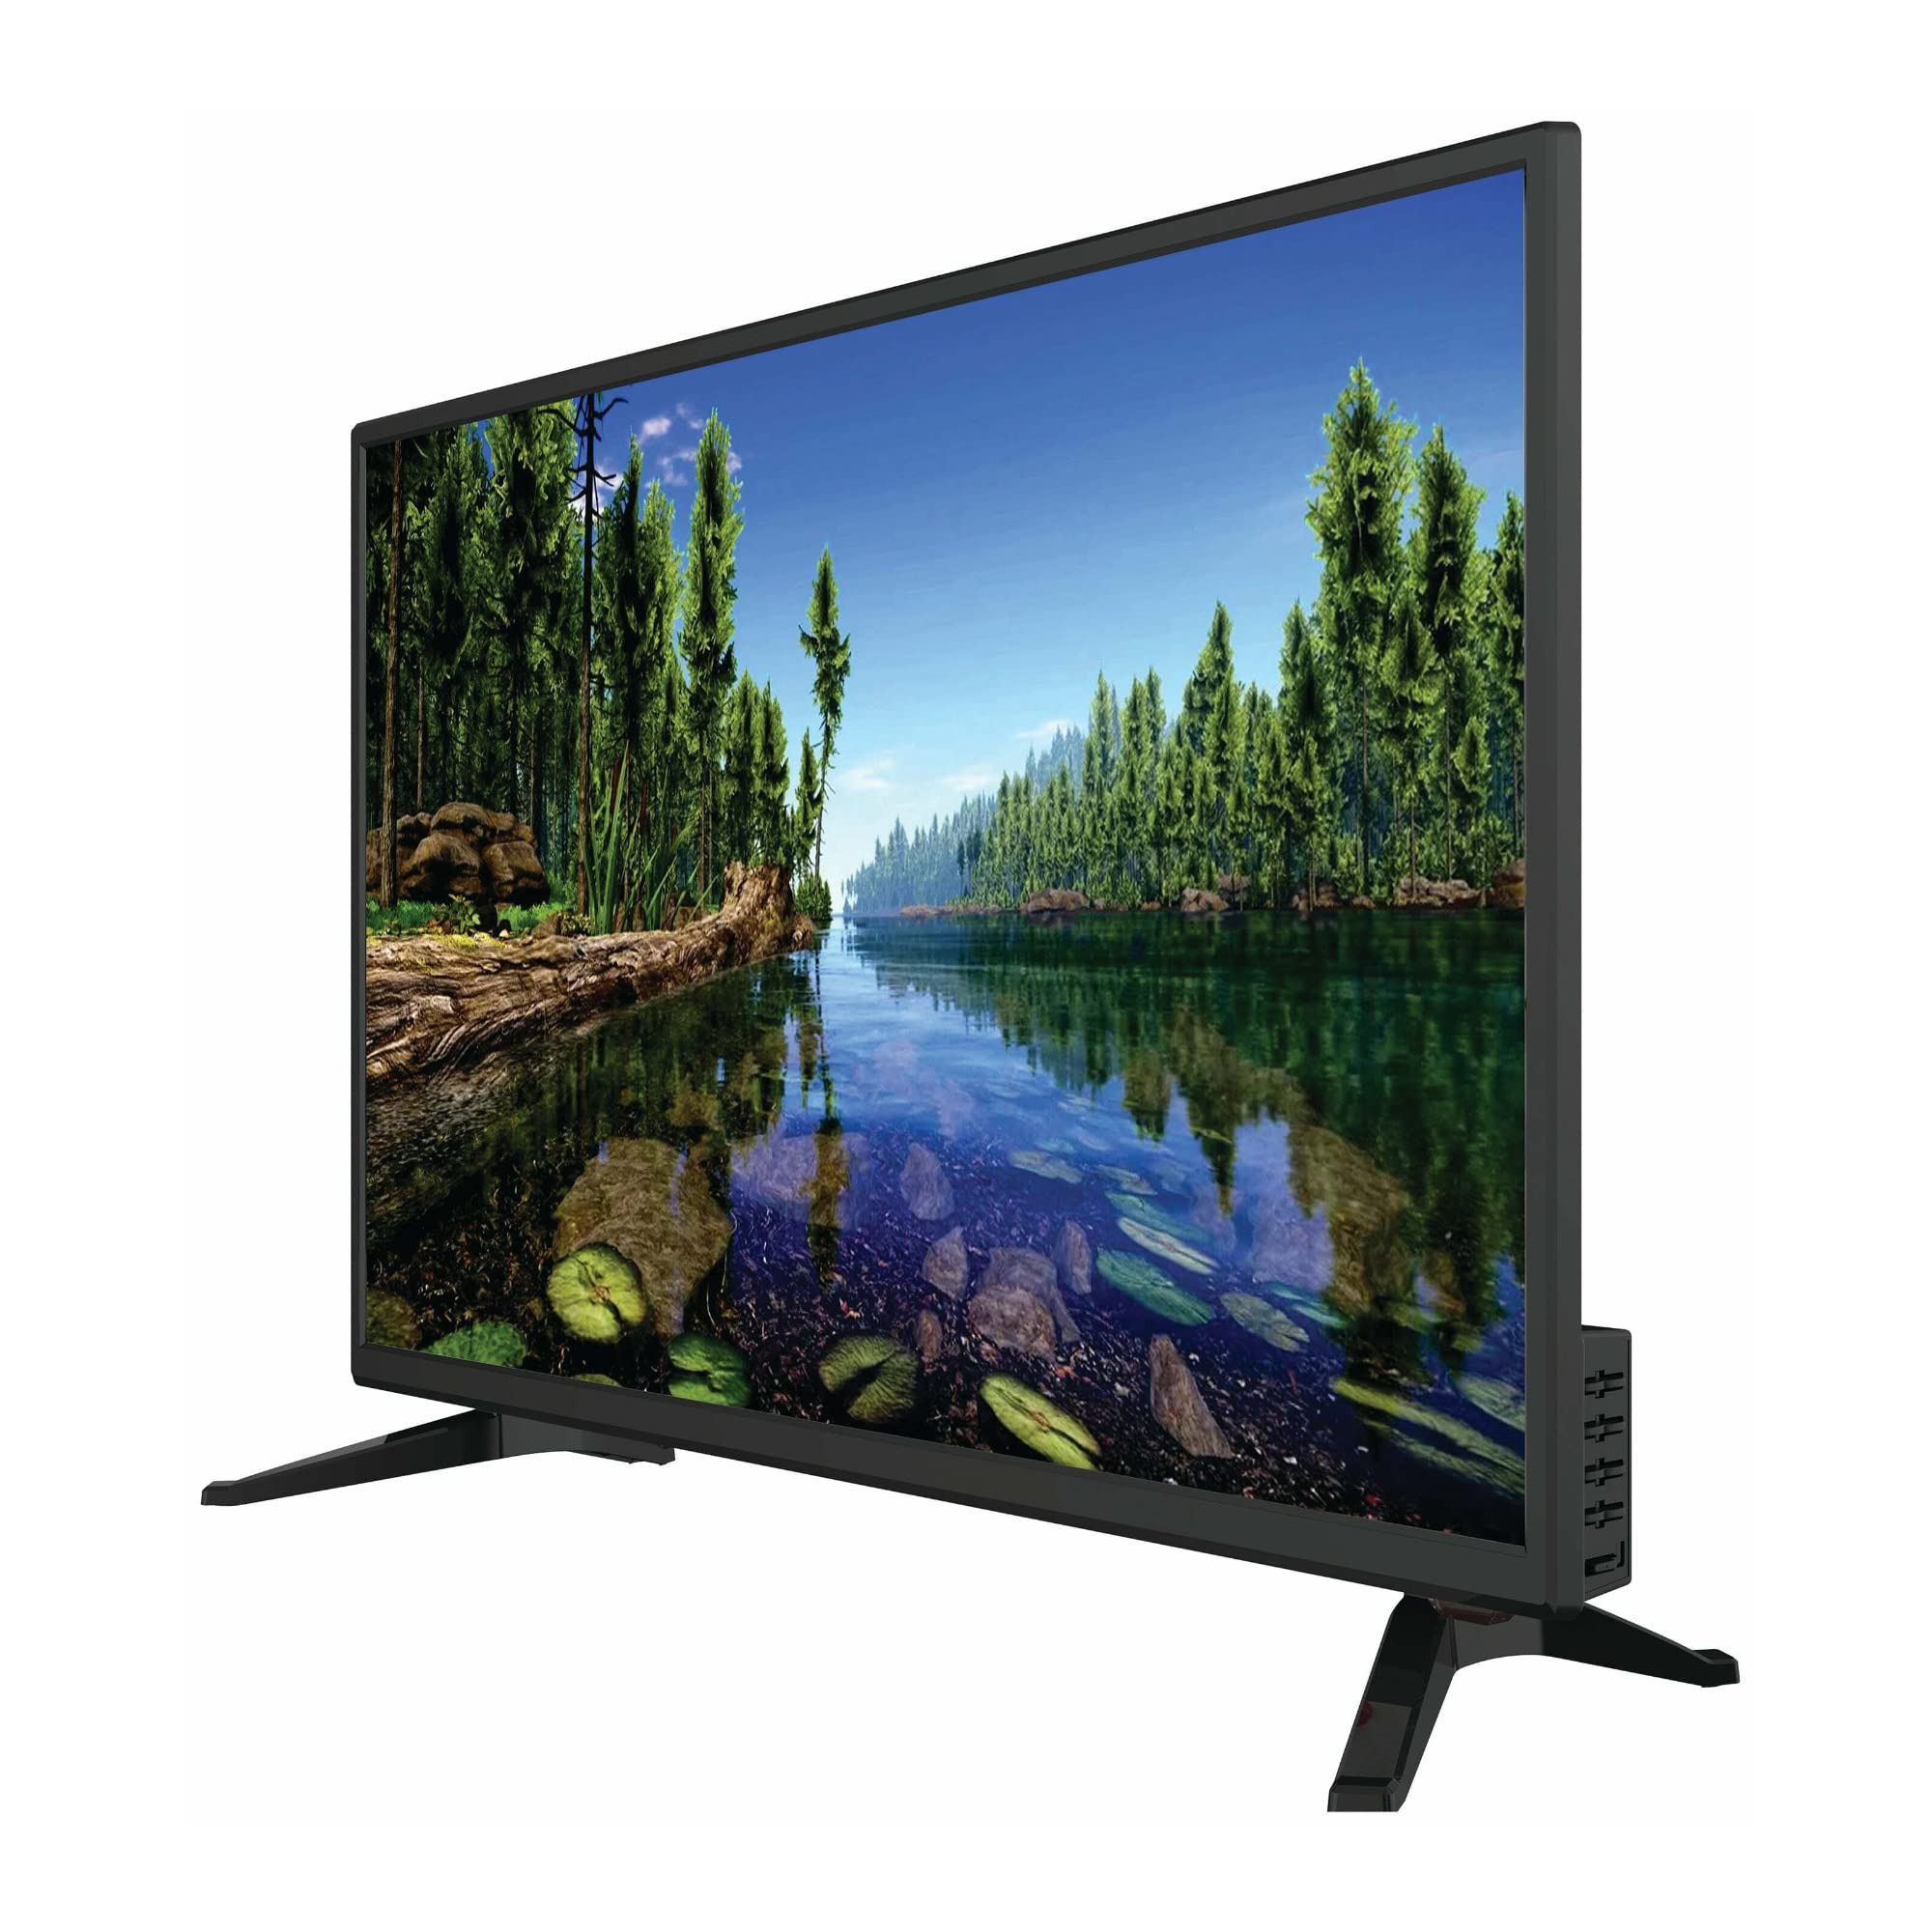 Supersonic SC-3222 LED Widescreen HDTV 32